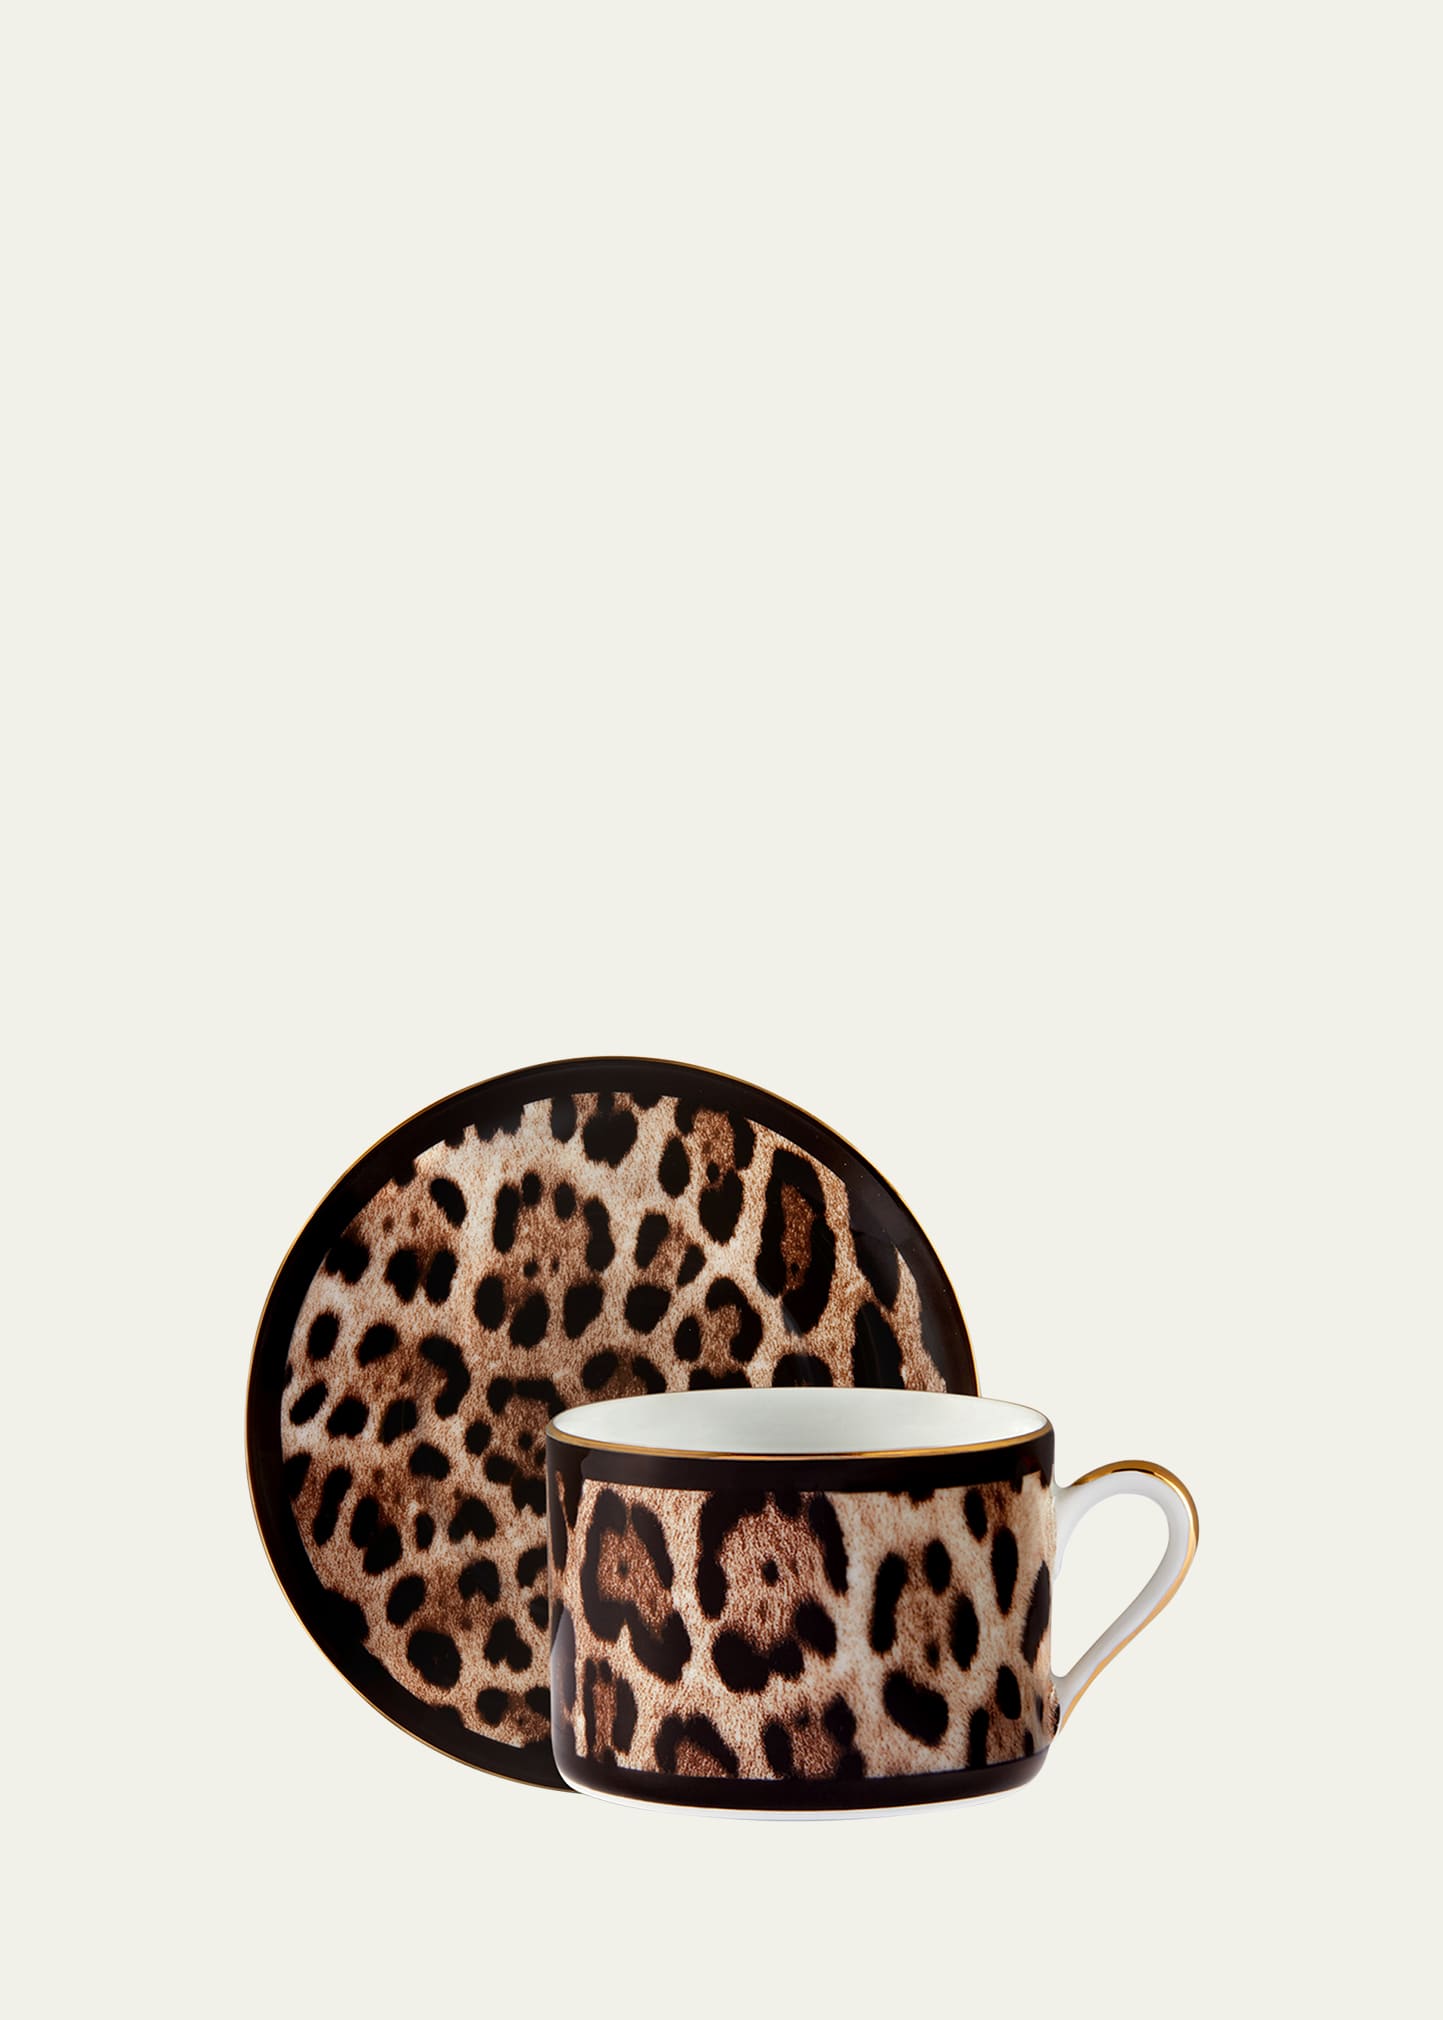 Leopard All Over Tea Cup and Saucer